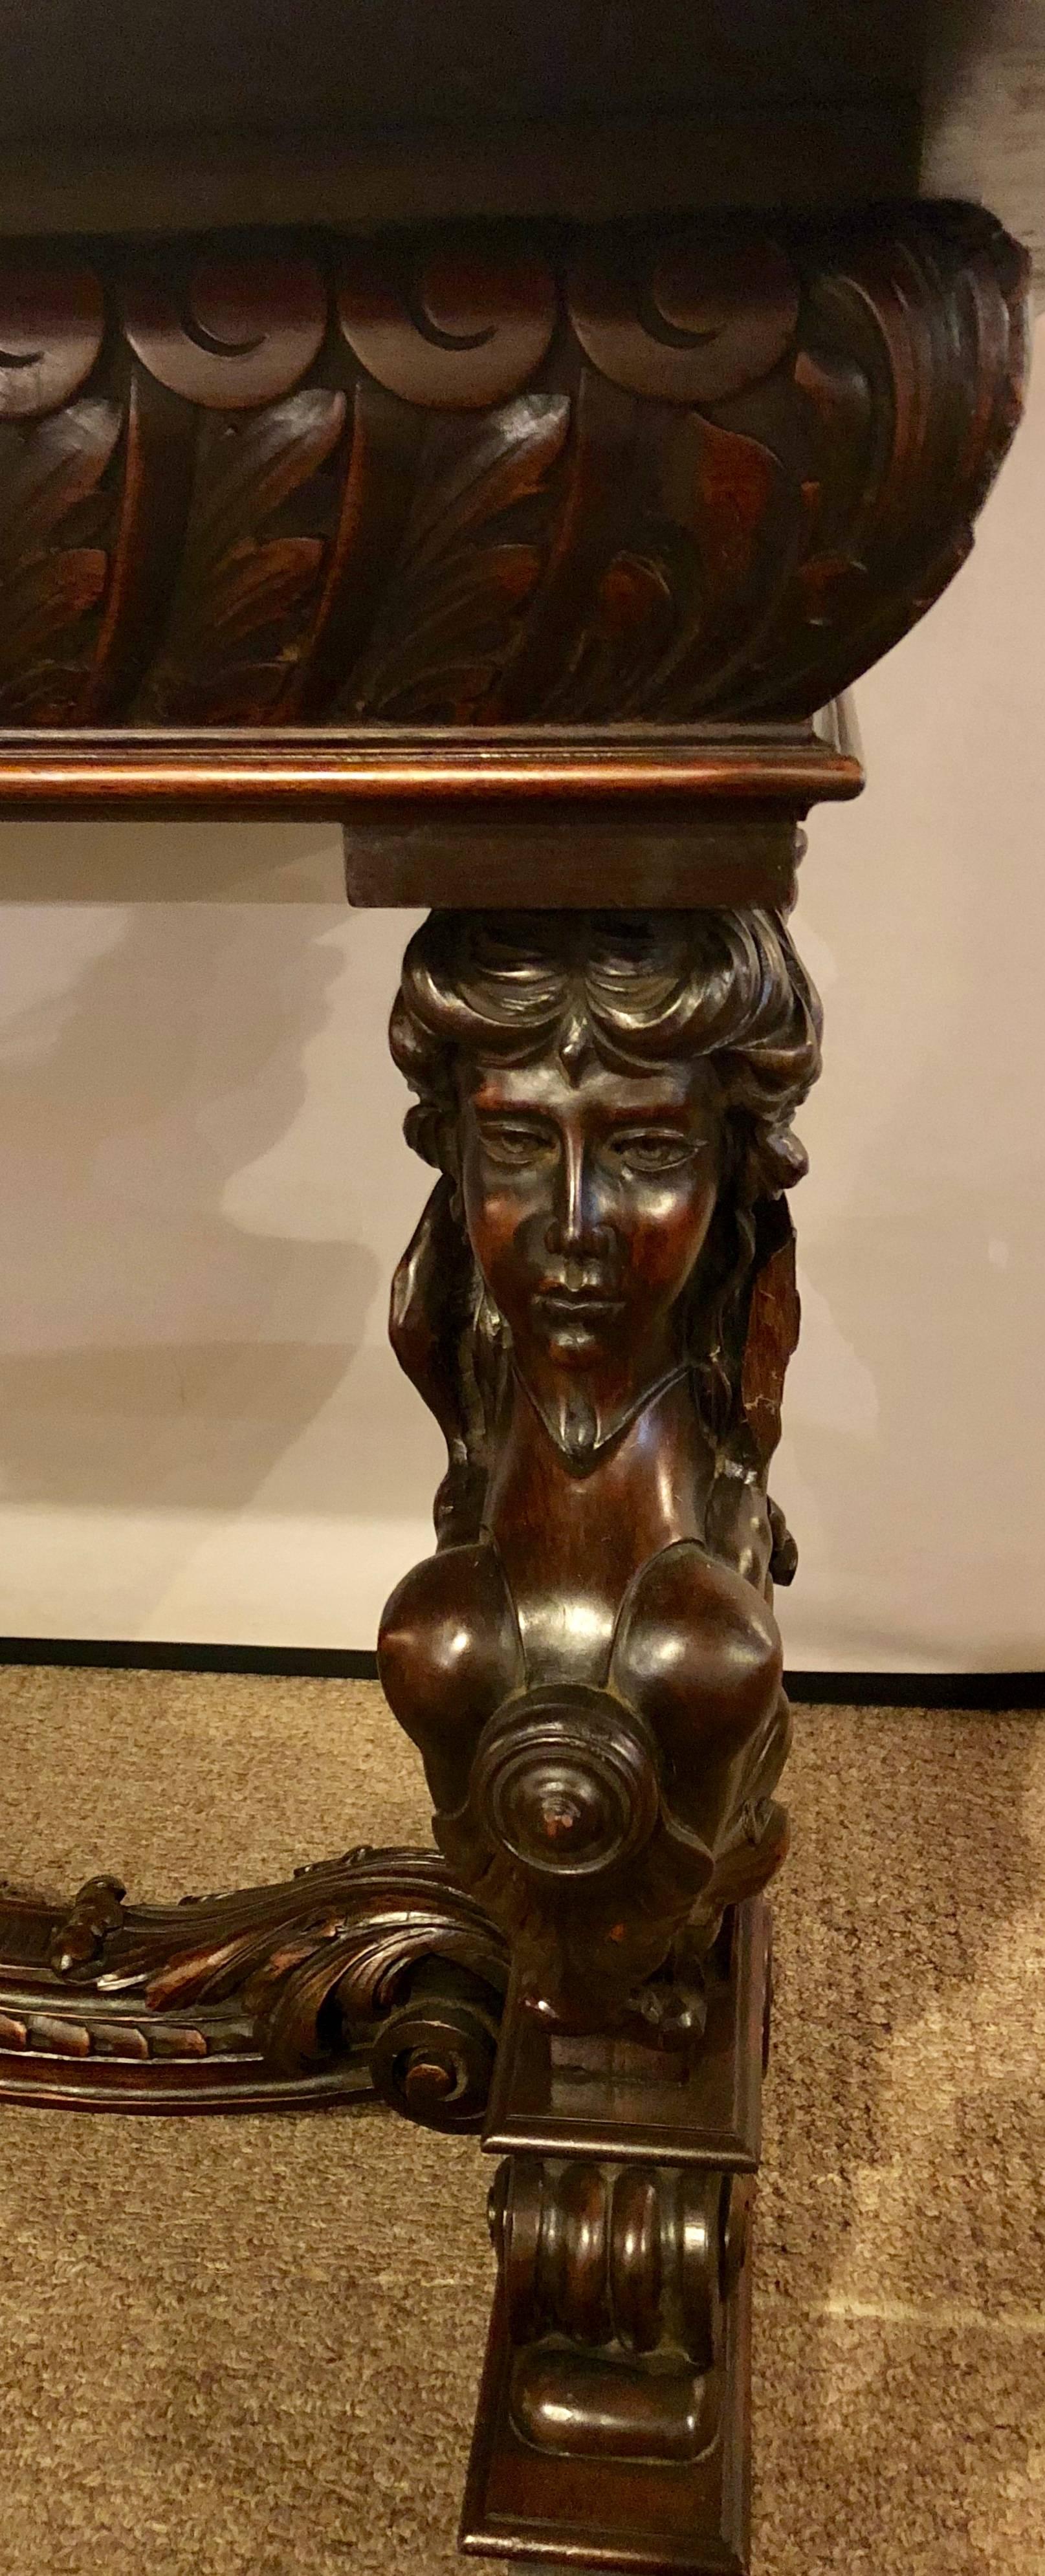 This figural carved Herter or Horner Brothers style library table or desk with winged maidens is truly spectacular. The tabletop made of solid wood supported by a group of four bare breasted winged full bodied maidens flanking a centre column. The